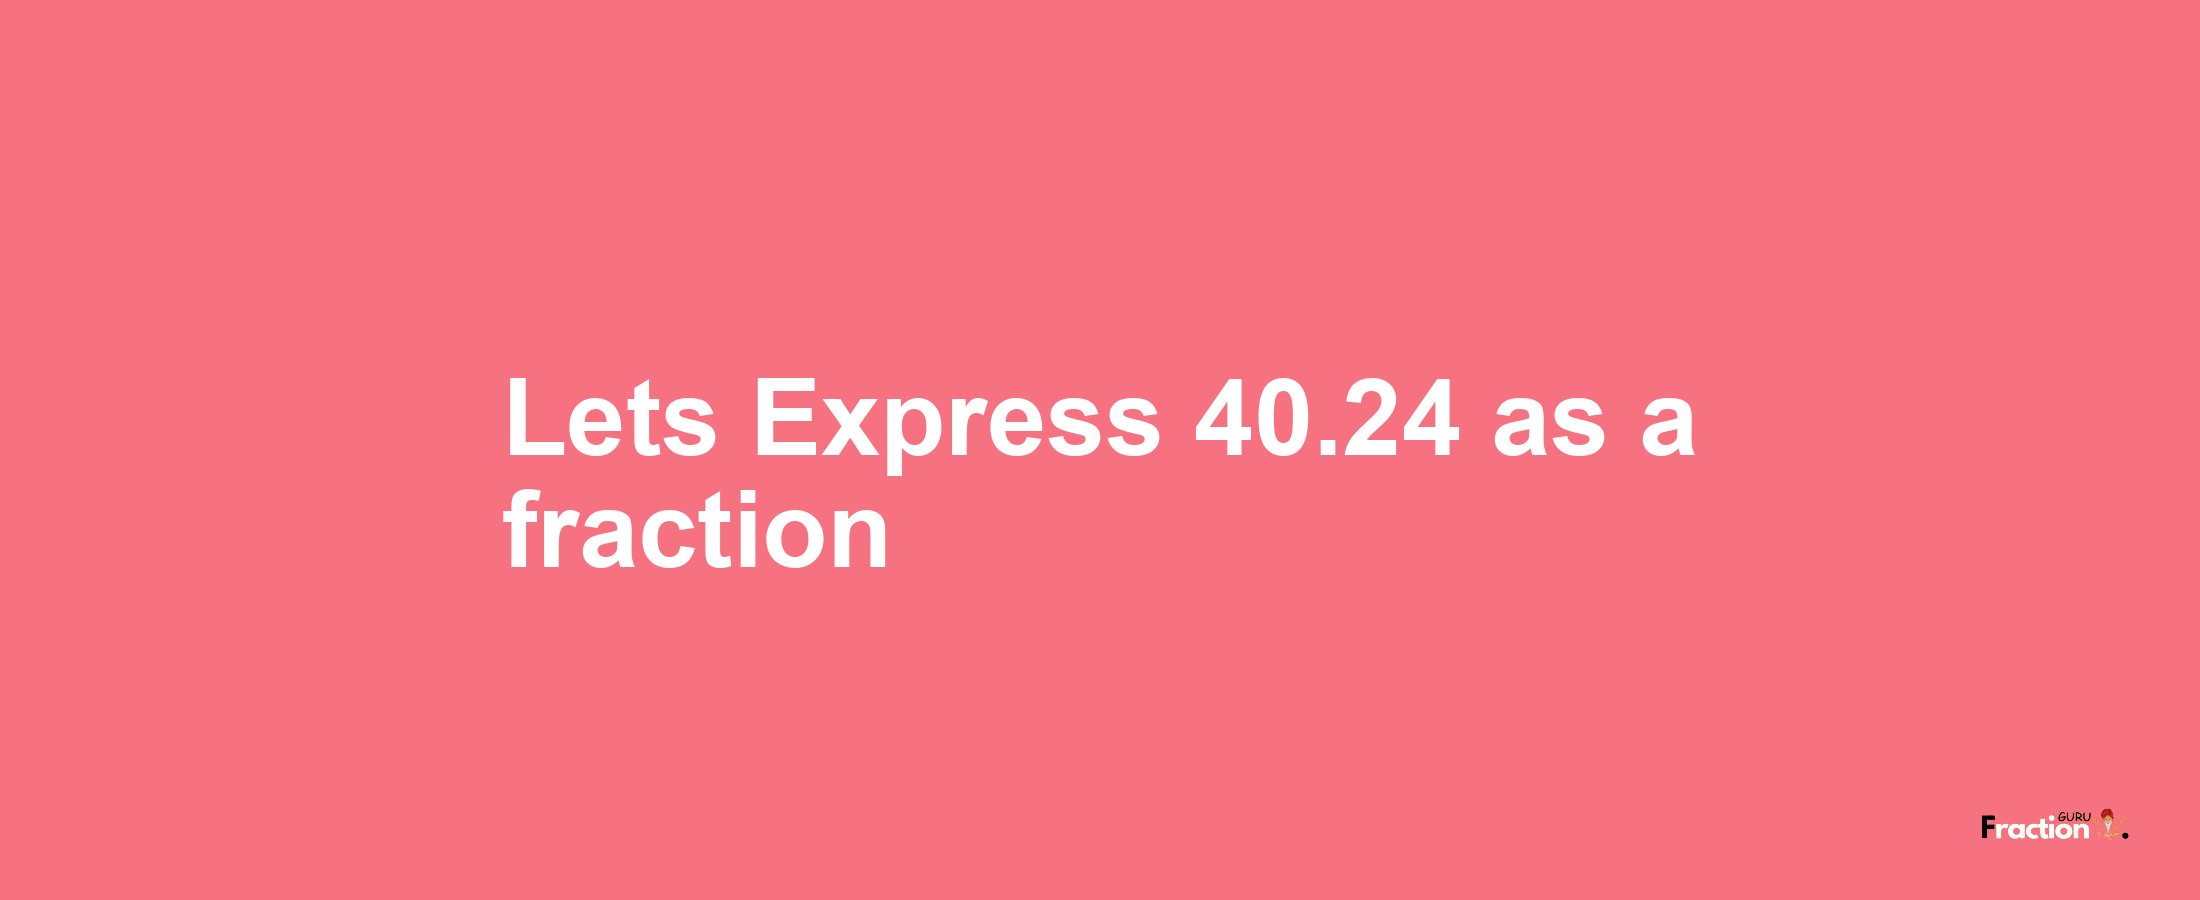 Lets Express 40.24 as afraction